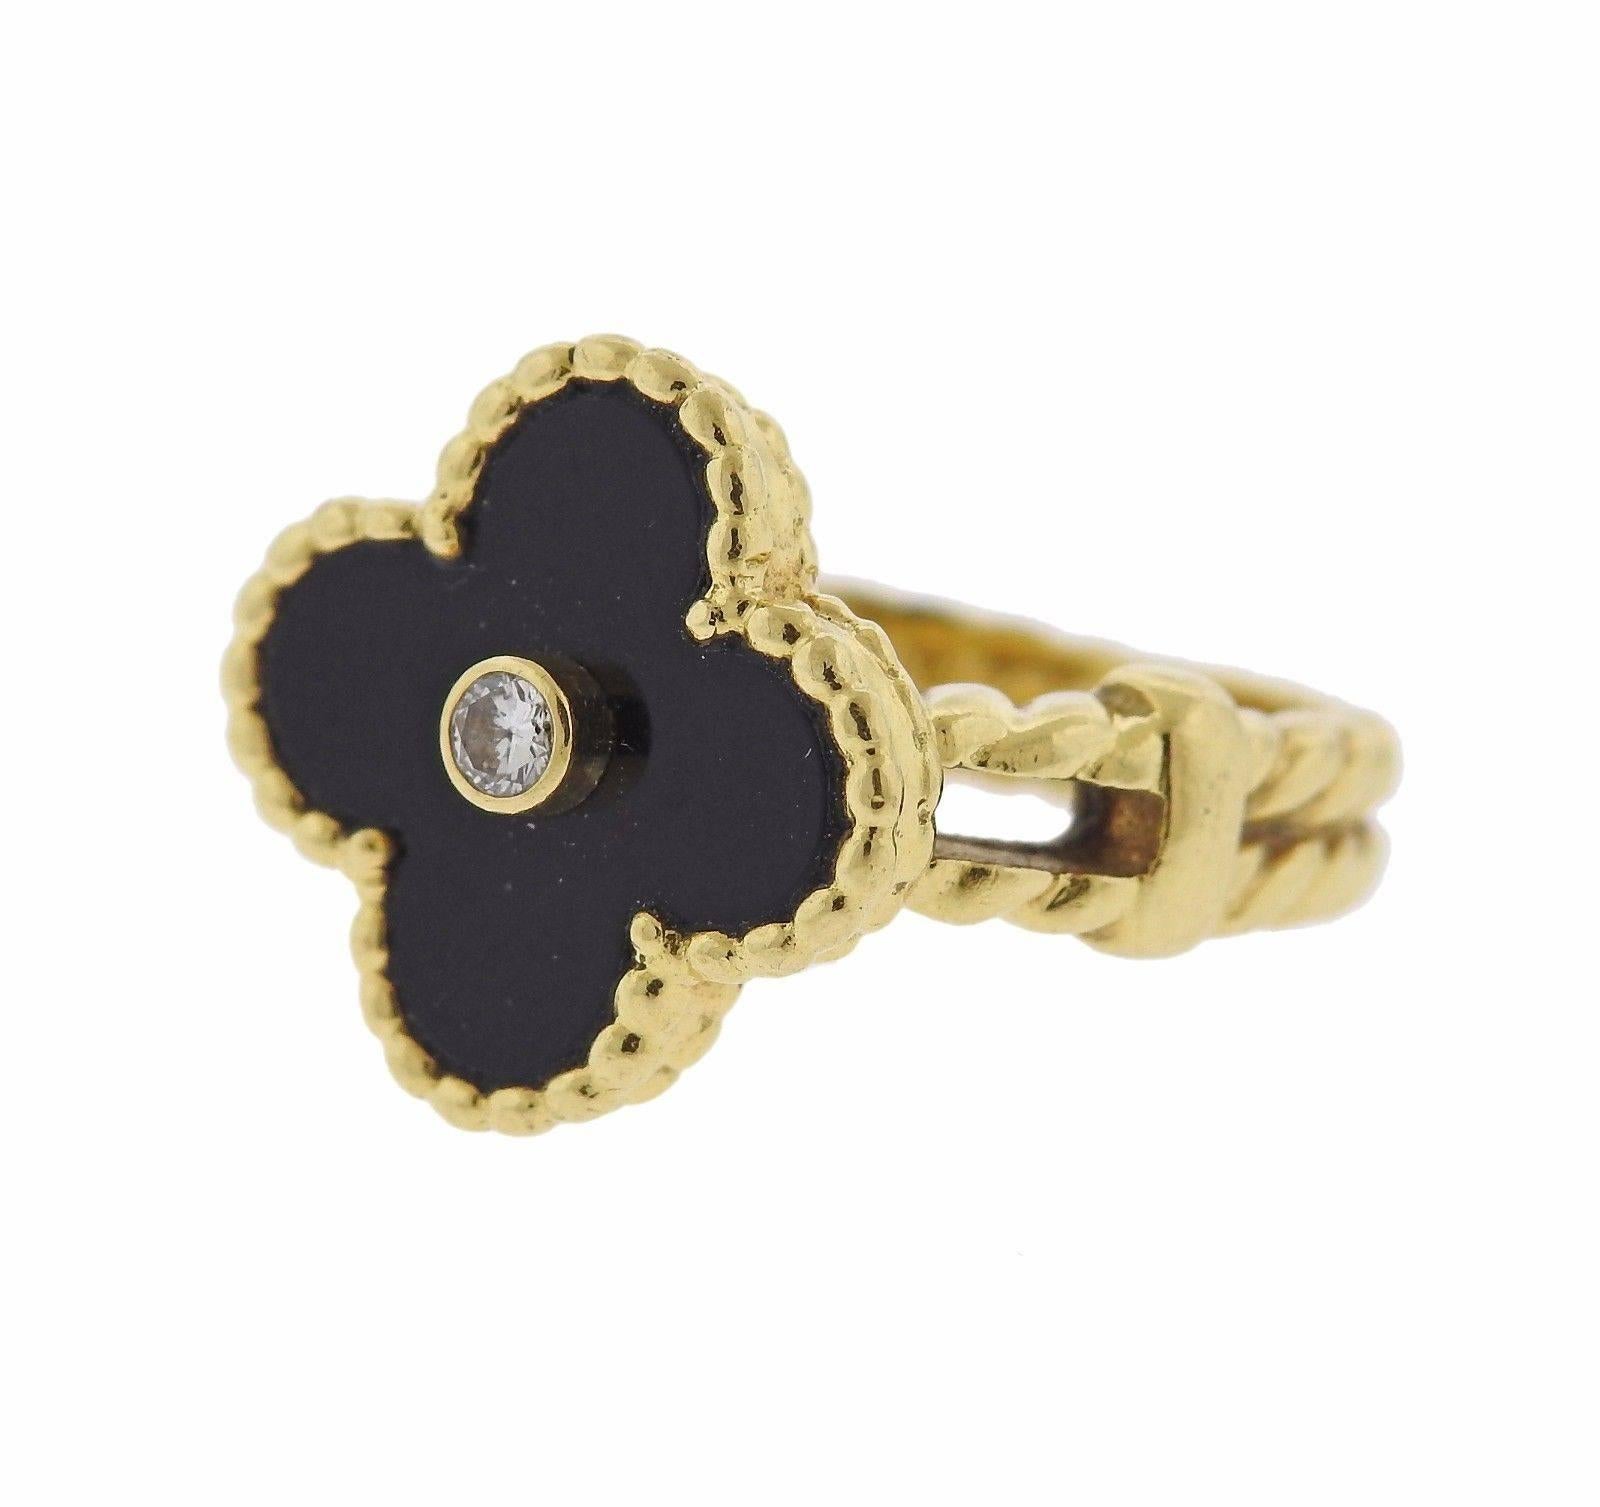 An 18k yellow gold ring set with onyx and a VVS/F-G diamond weighing approximately 0.05ctw.  The ring is a size 4. The ring top measures 15mm x 15mm.  The weight of the piece is 7.3 grams.  Marked: VCA 750, AL0500N****.